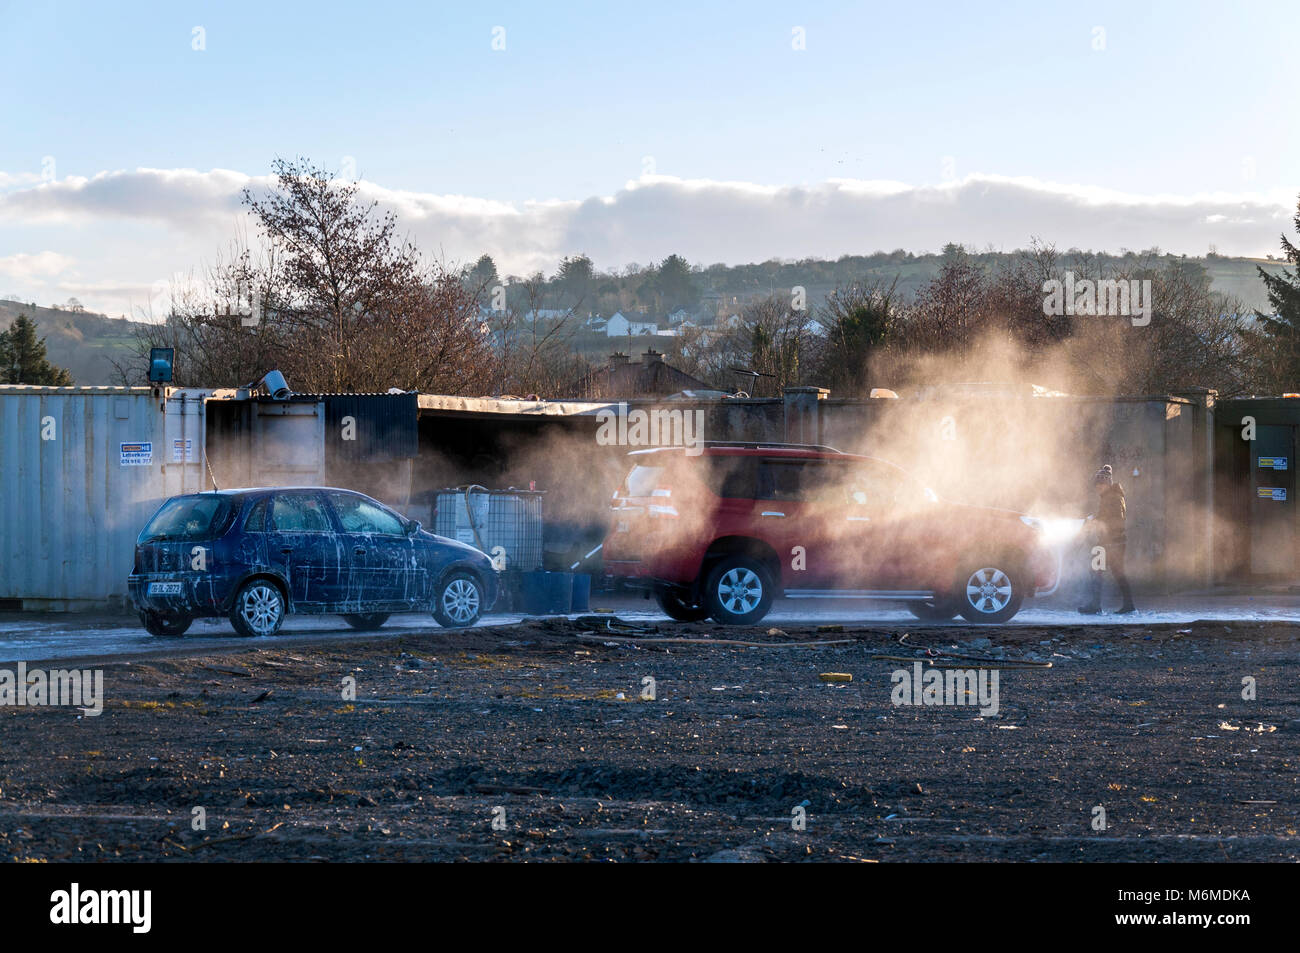 Pop up manual hand car wash washing in Letterkenny, County Donegal, Ireland Stock Photo